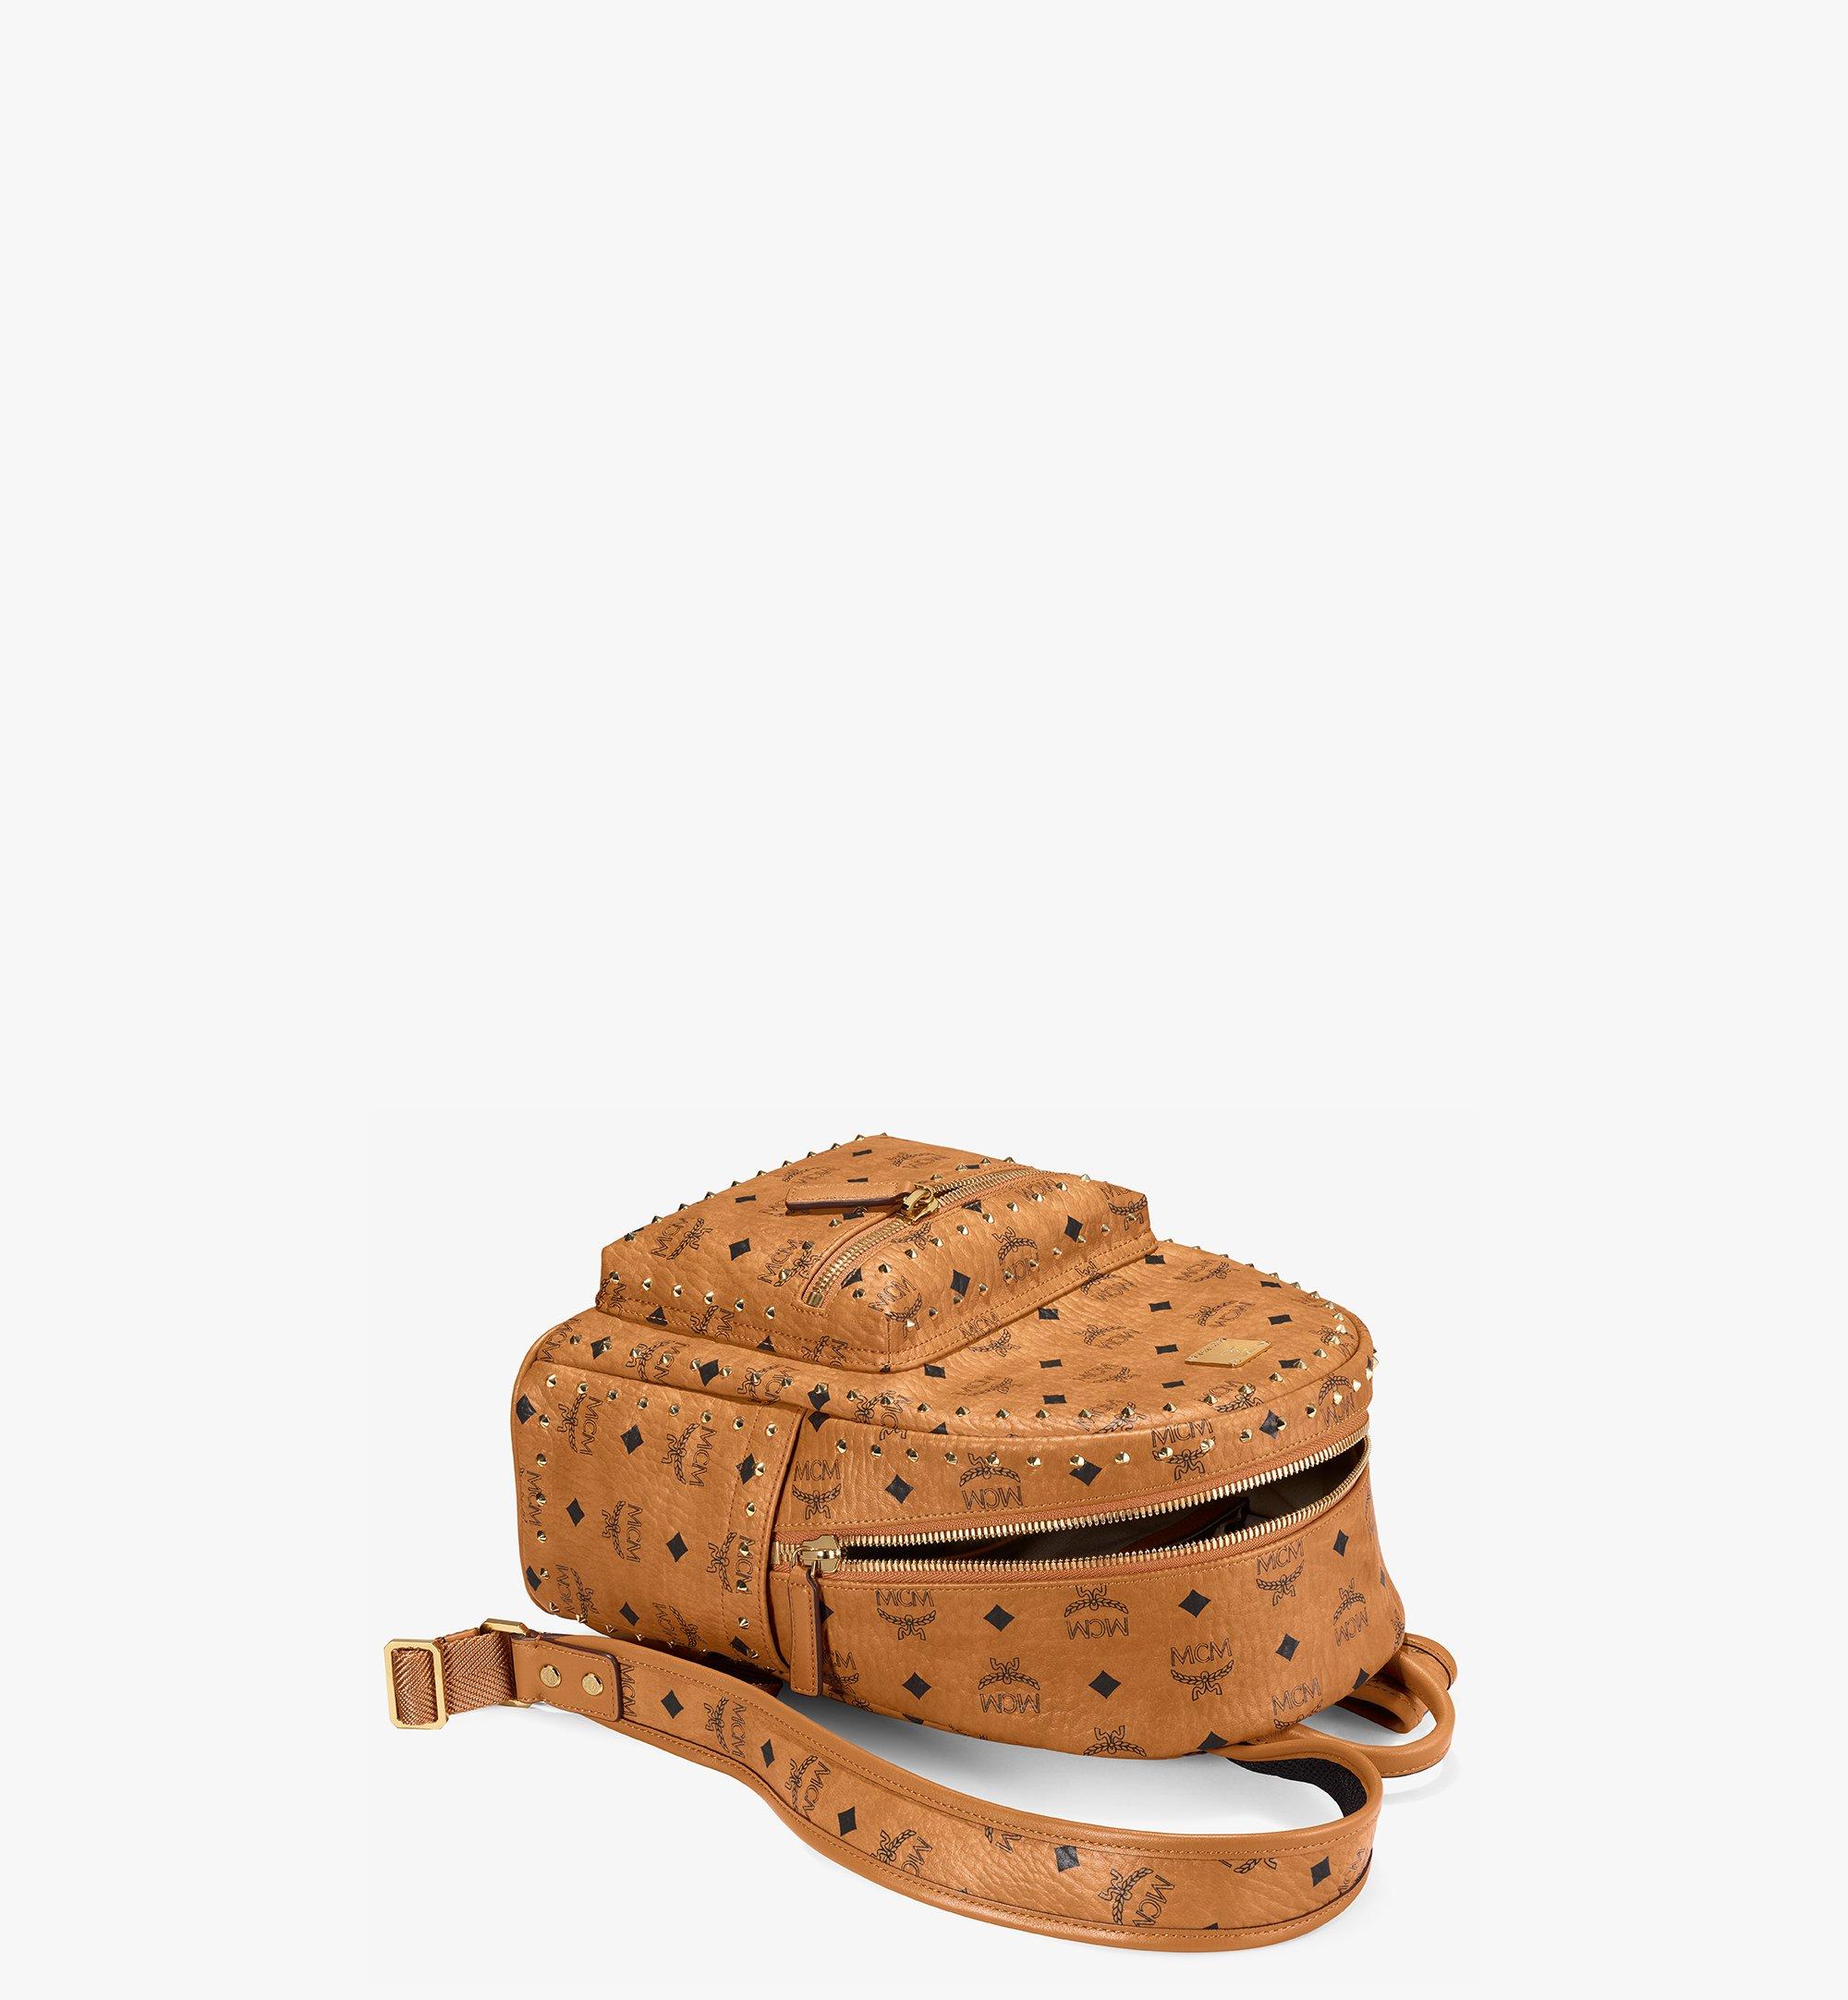 MCM Stark Backpack in Studded Outline Visetos Cognac MMKAAVE01CO001 Alternate View 2